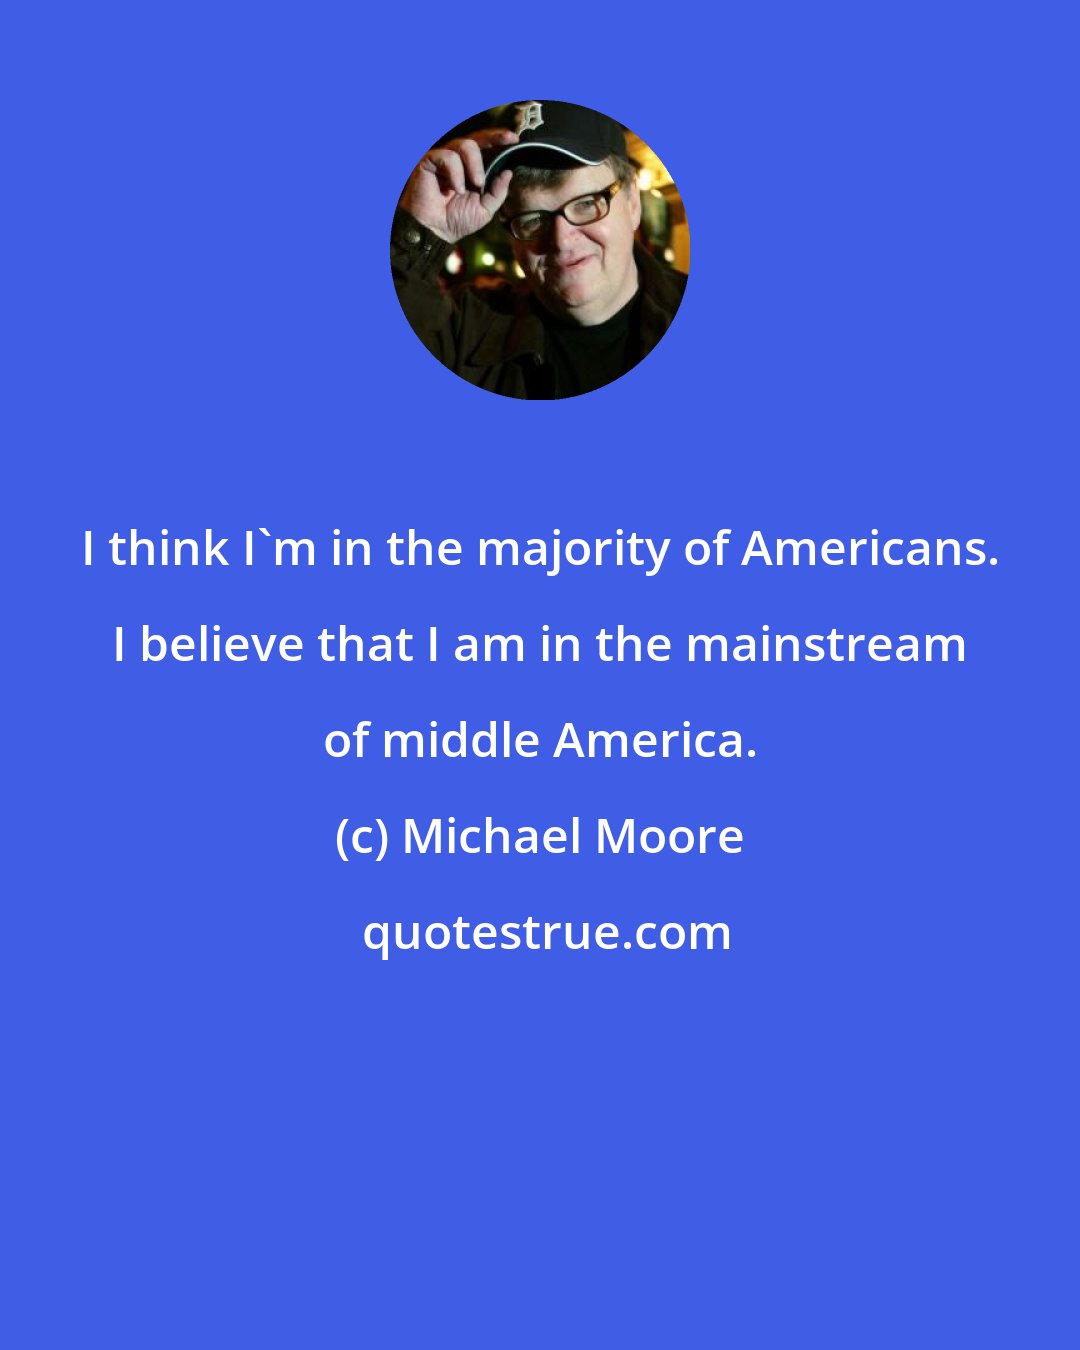 Michael Moore: I think I'm in the majority of Americans. I believe that I am in the mainstream of middle America.